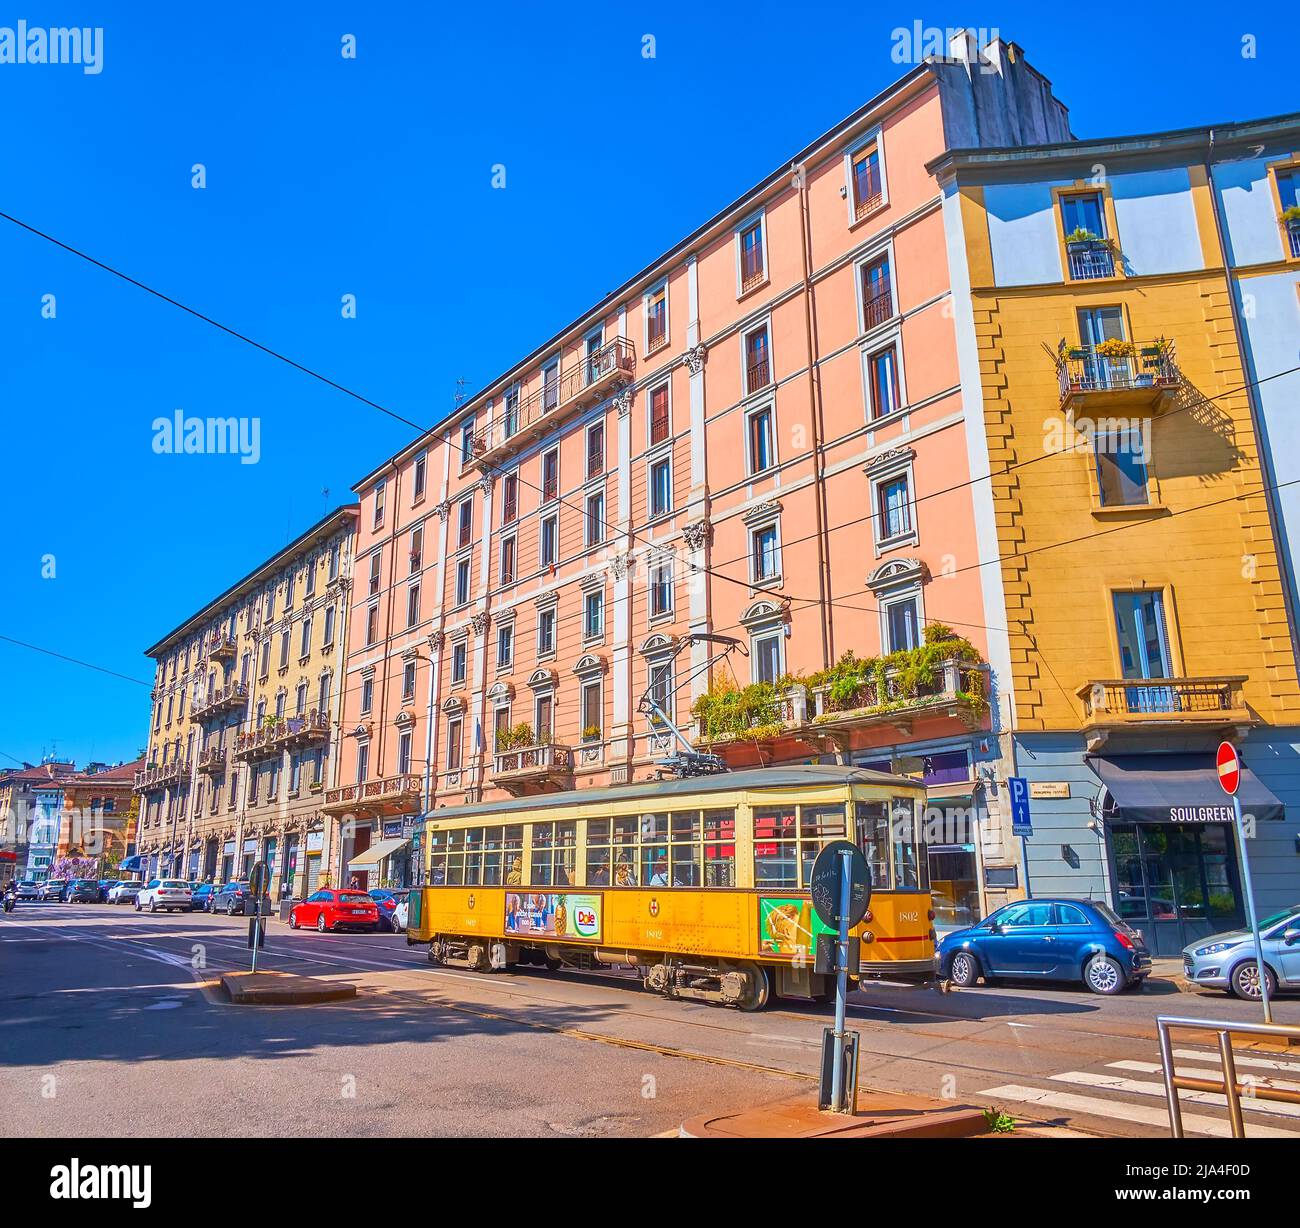 MILAN, ITALY - APRIL 5, 2022: The retro styled tram on Vialle Monte Grappa in Porta Nuova district, on April 5 in Milan, Italy Stock Photo